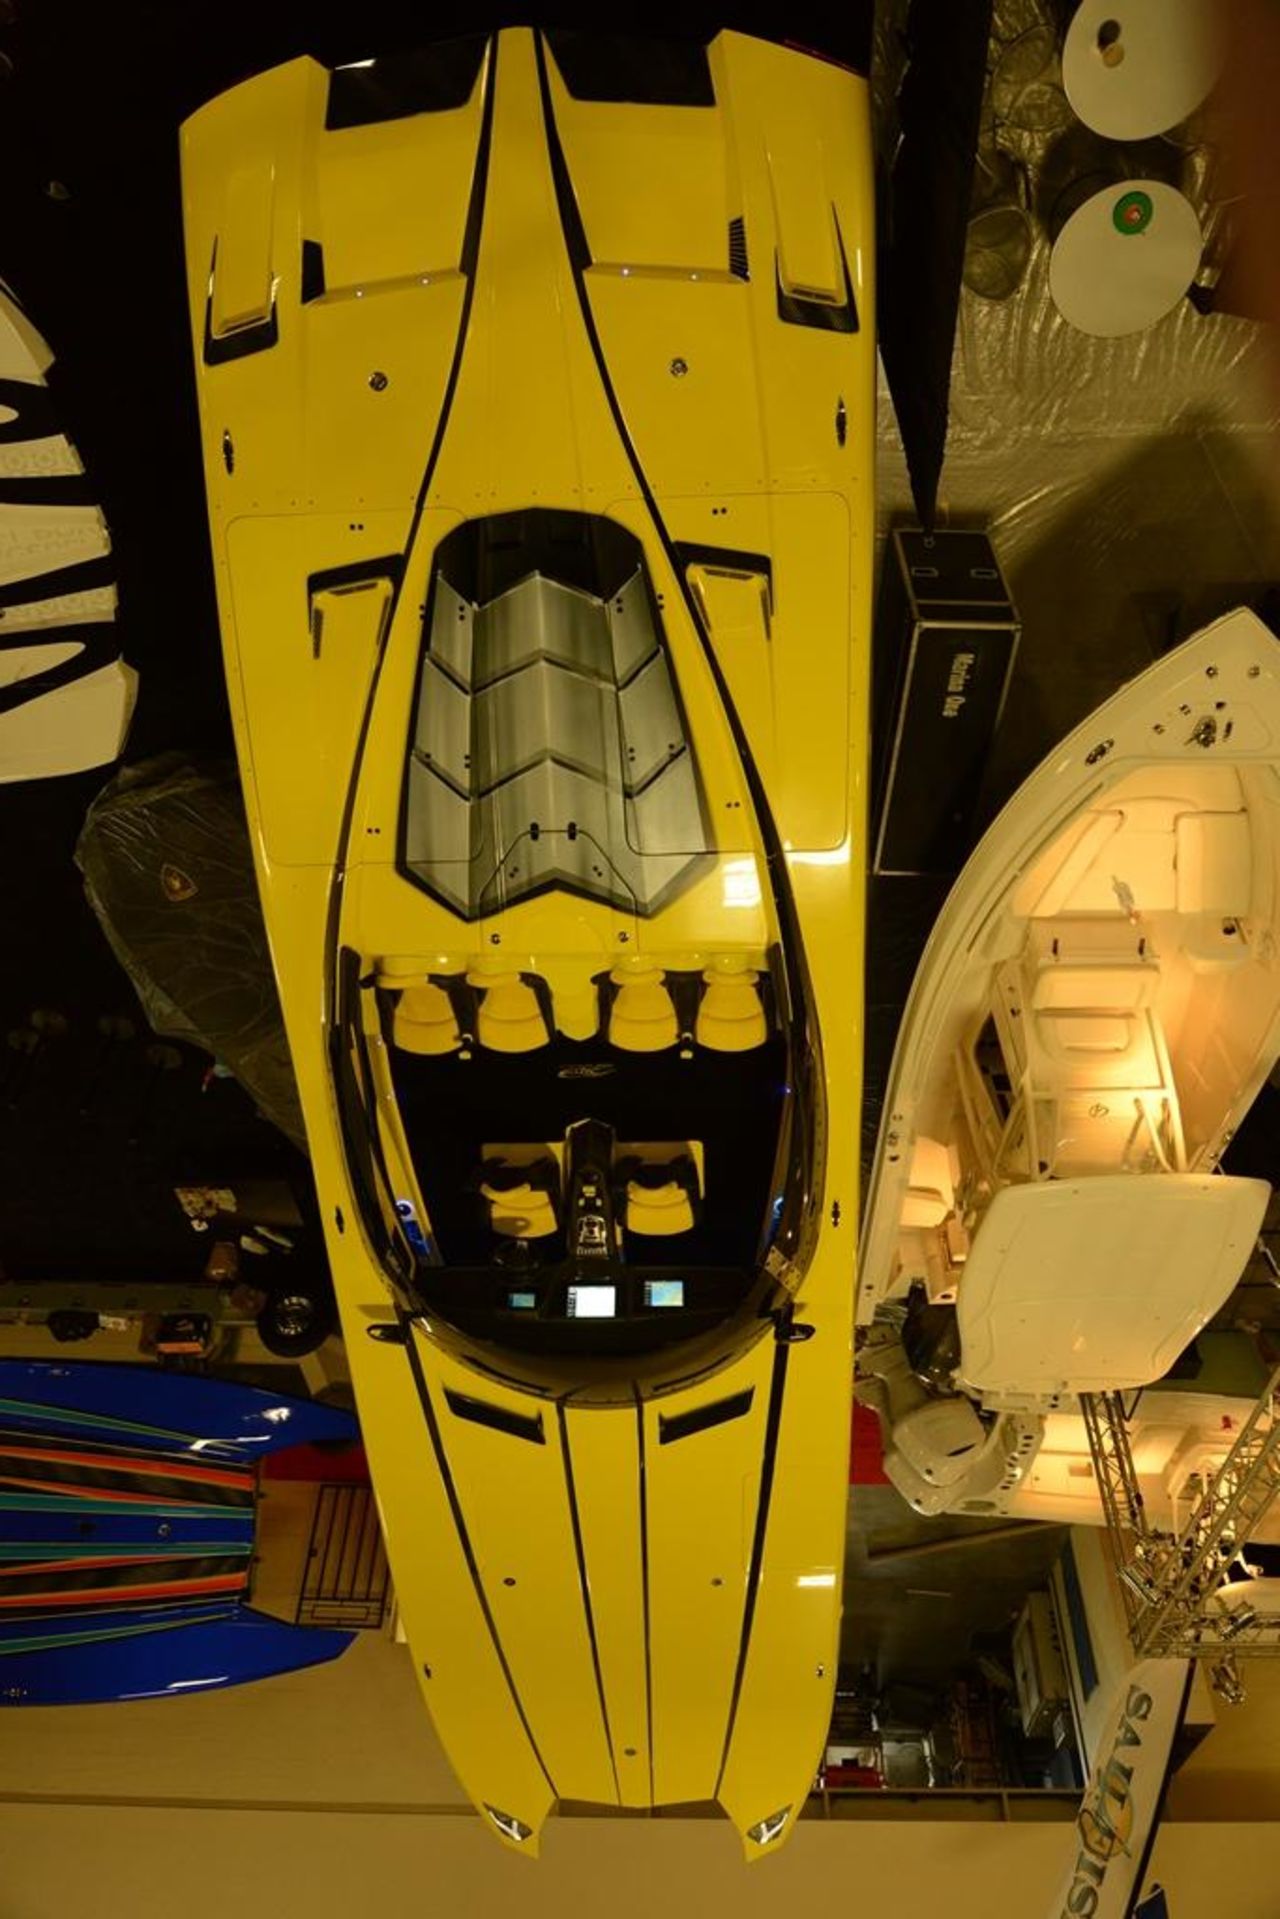 The boat was made as a "homage" to Gargiulo's Lamborghini car, which cost $750,000. The flashy speedboat's engine package alone cost $400,000, with enough grunt to hit 300 kph. 